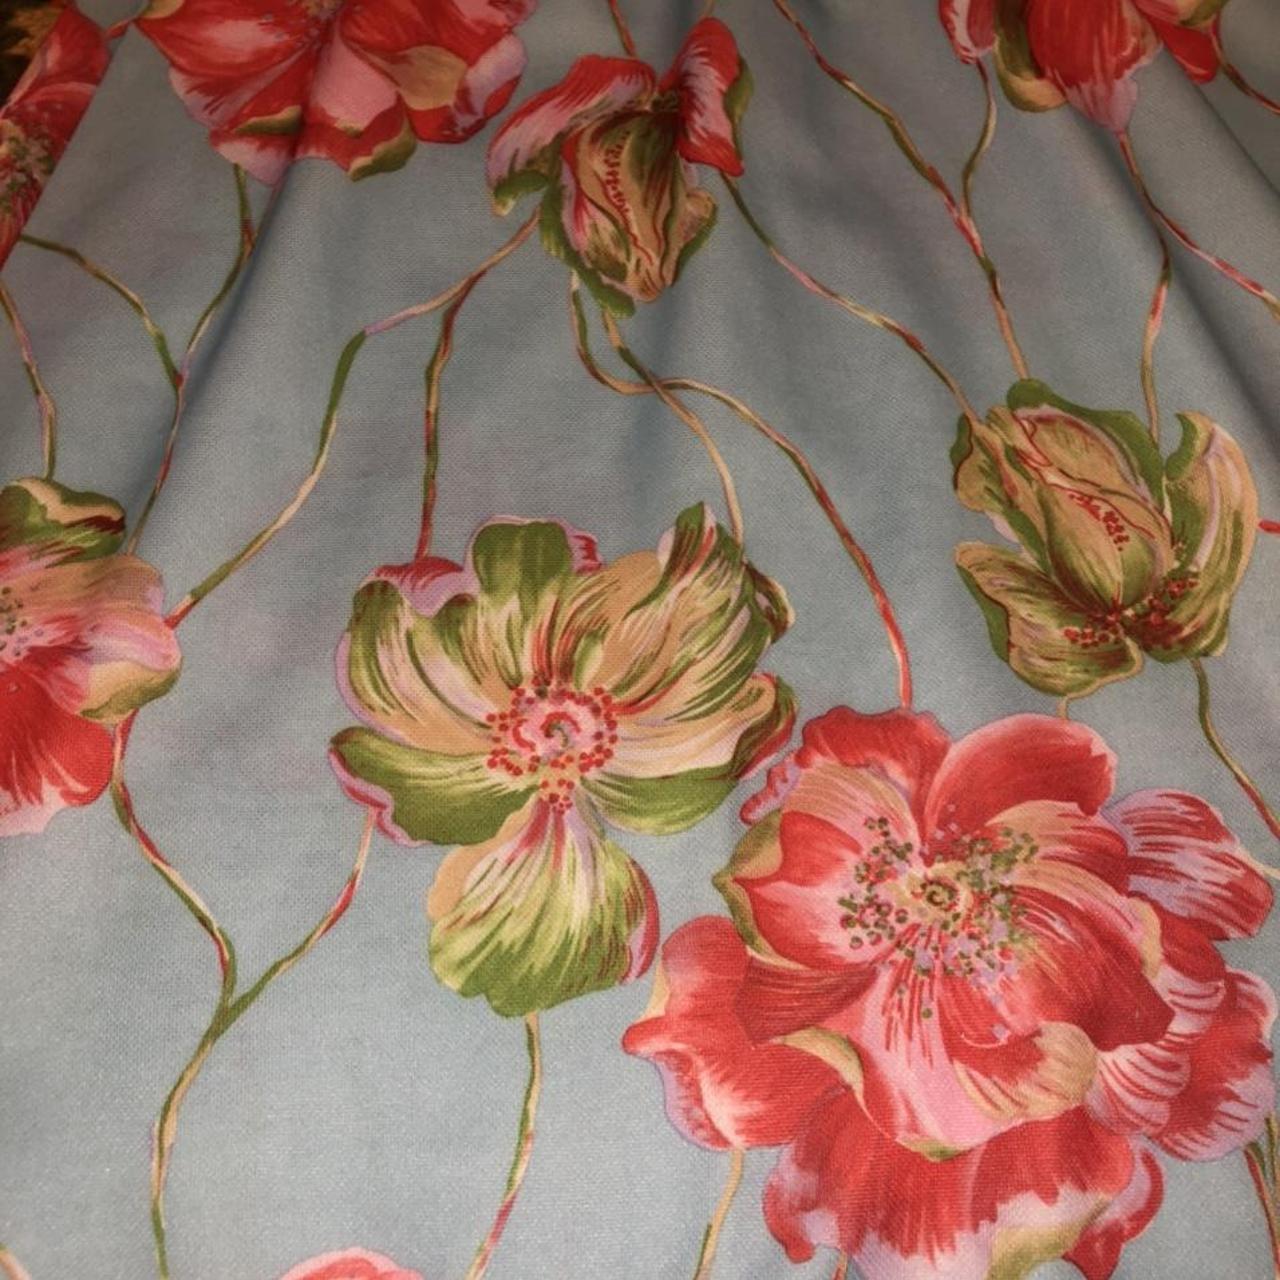 Product Image 2 - Authentic Vintage 70s Floral Skirt!